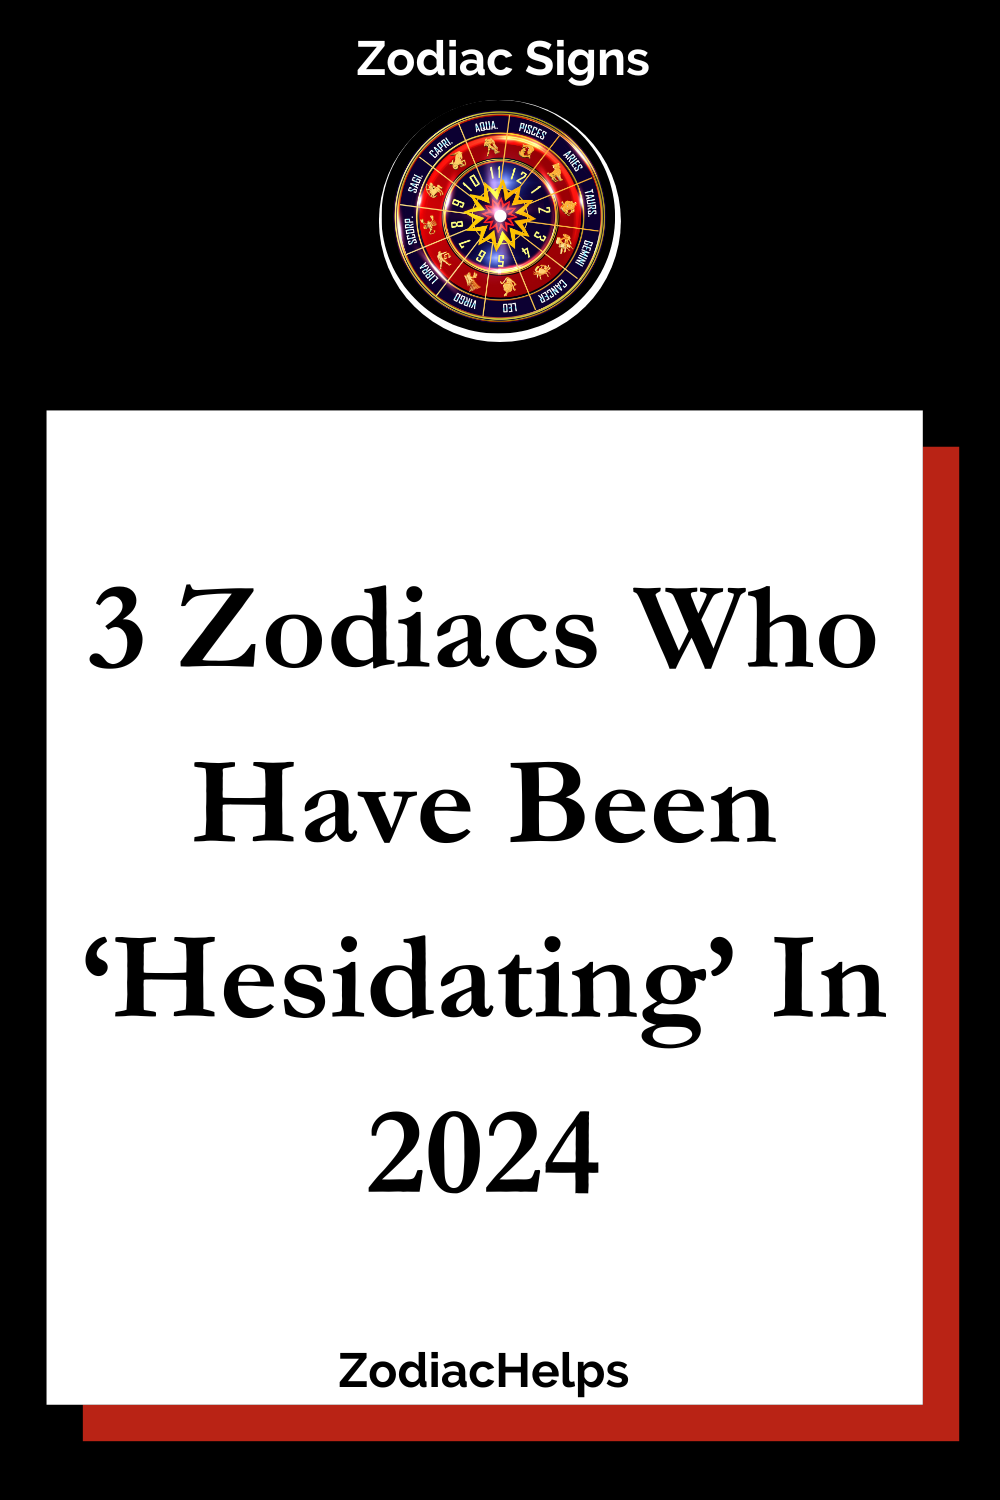 3 Zodiacs Who Have Been ‘Hesidating’ In 2024